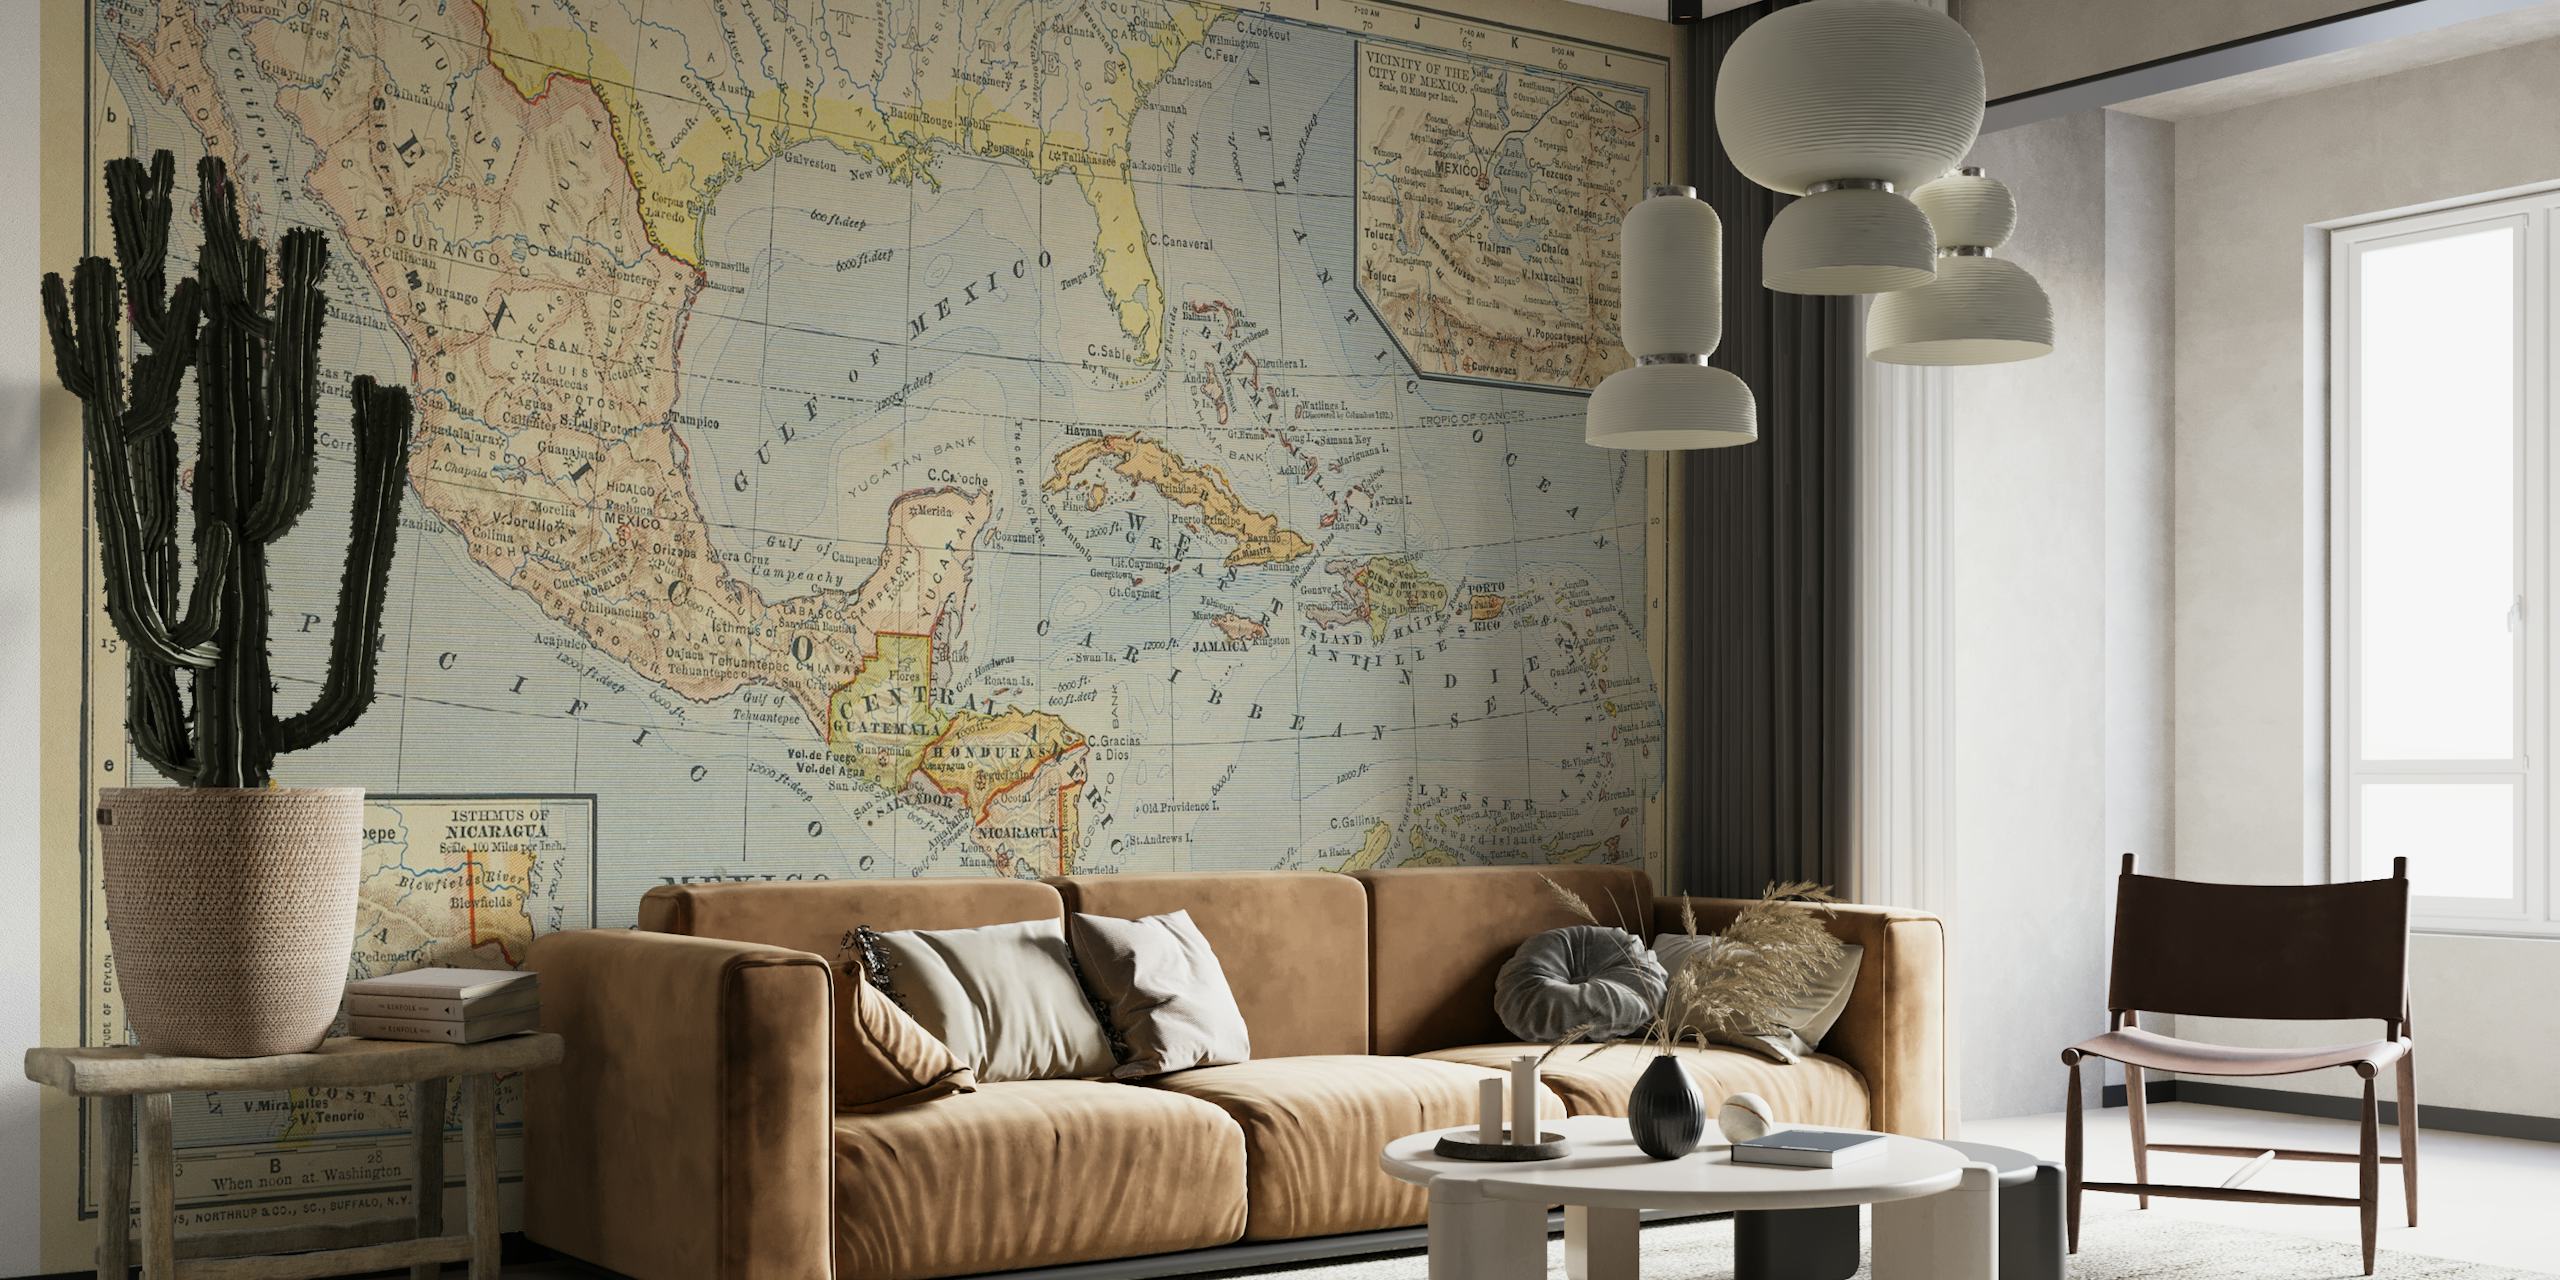 Vintage Caribbean and Mexico map wall mural depicting detailed historical cartography.